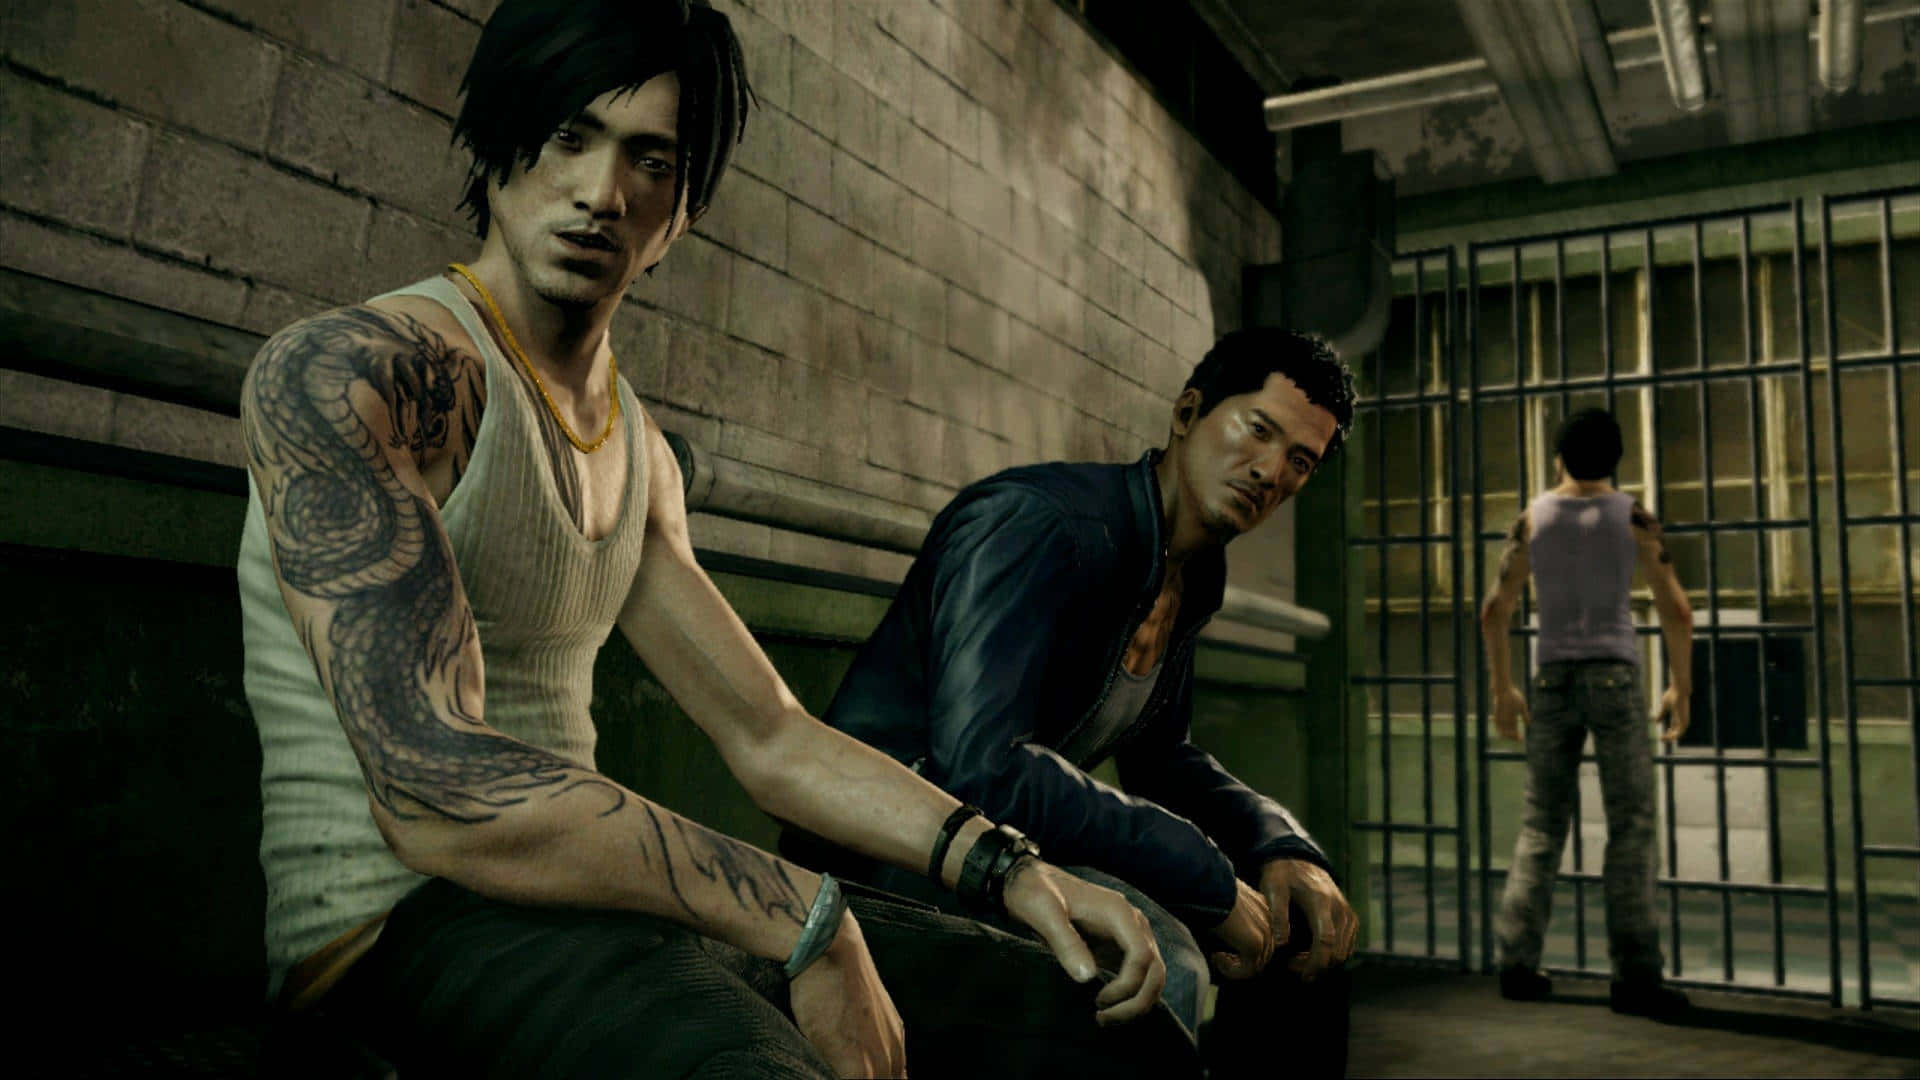 Best Sleeping Dogs Background Wei Shen And Jackie Ma In Jail